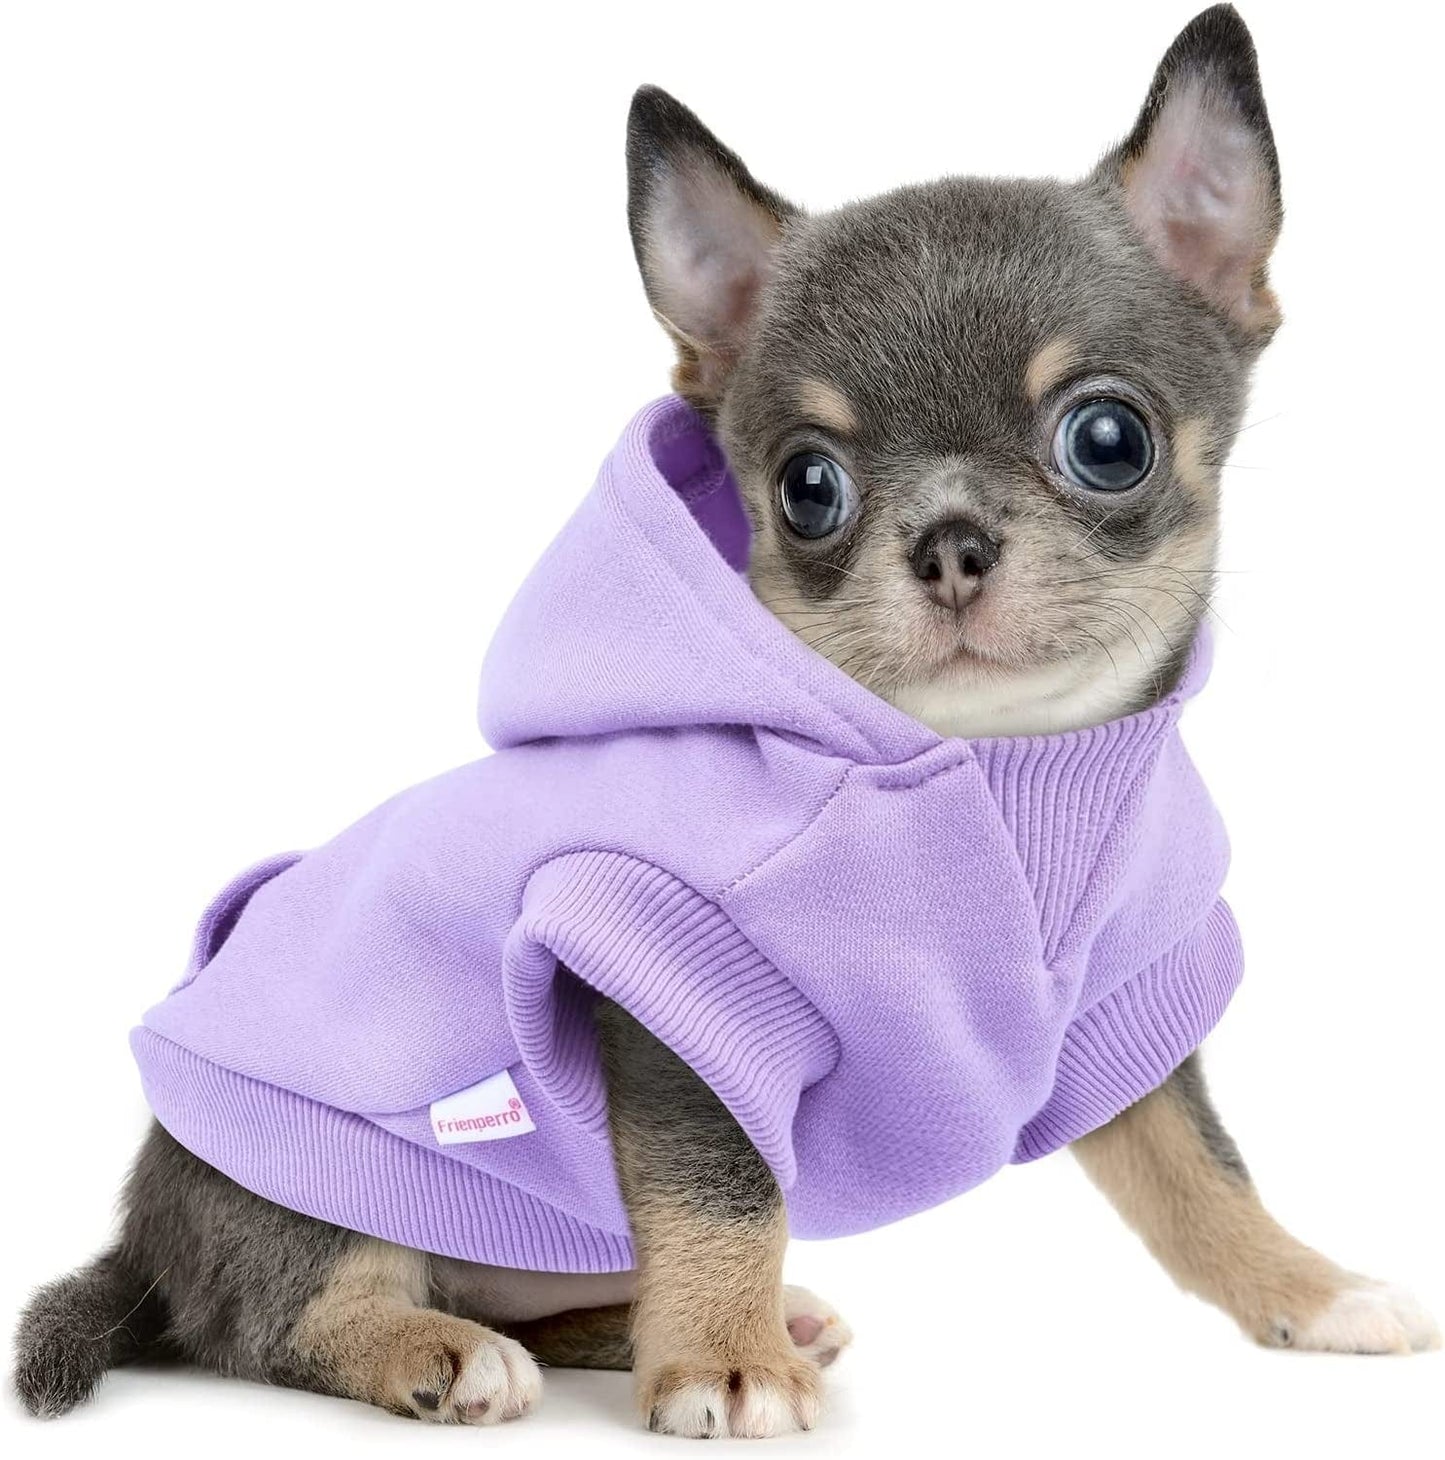 𝐍𝐄𝐖 𝐀𝐑𝐑𝐈𝐕𝐀𝐋 Frienperro Dog Clothes for Small Dogs Girl Boy, 100% Cotton Buffalo Plaid Small Dog Hoodie, Chihuahua Clothes Pet Cat Winter Warm Sweatshirt Sweater, Teacup Yorkie Puppy Coat Animals & Pet Supplies > Pet Supplies > Dog Supplies > Dog Apparel Frienperro Purple XX-Small 